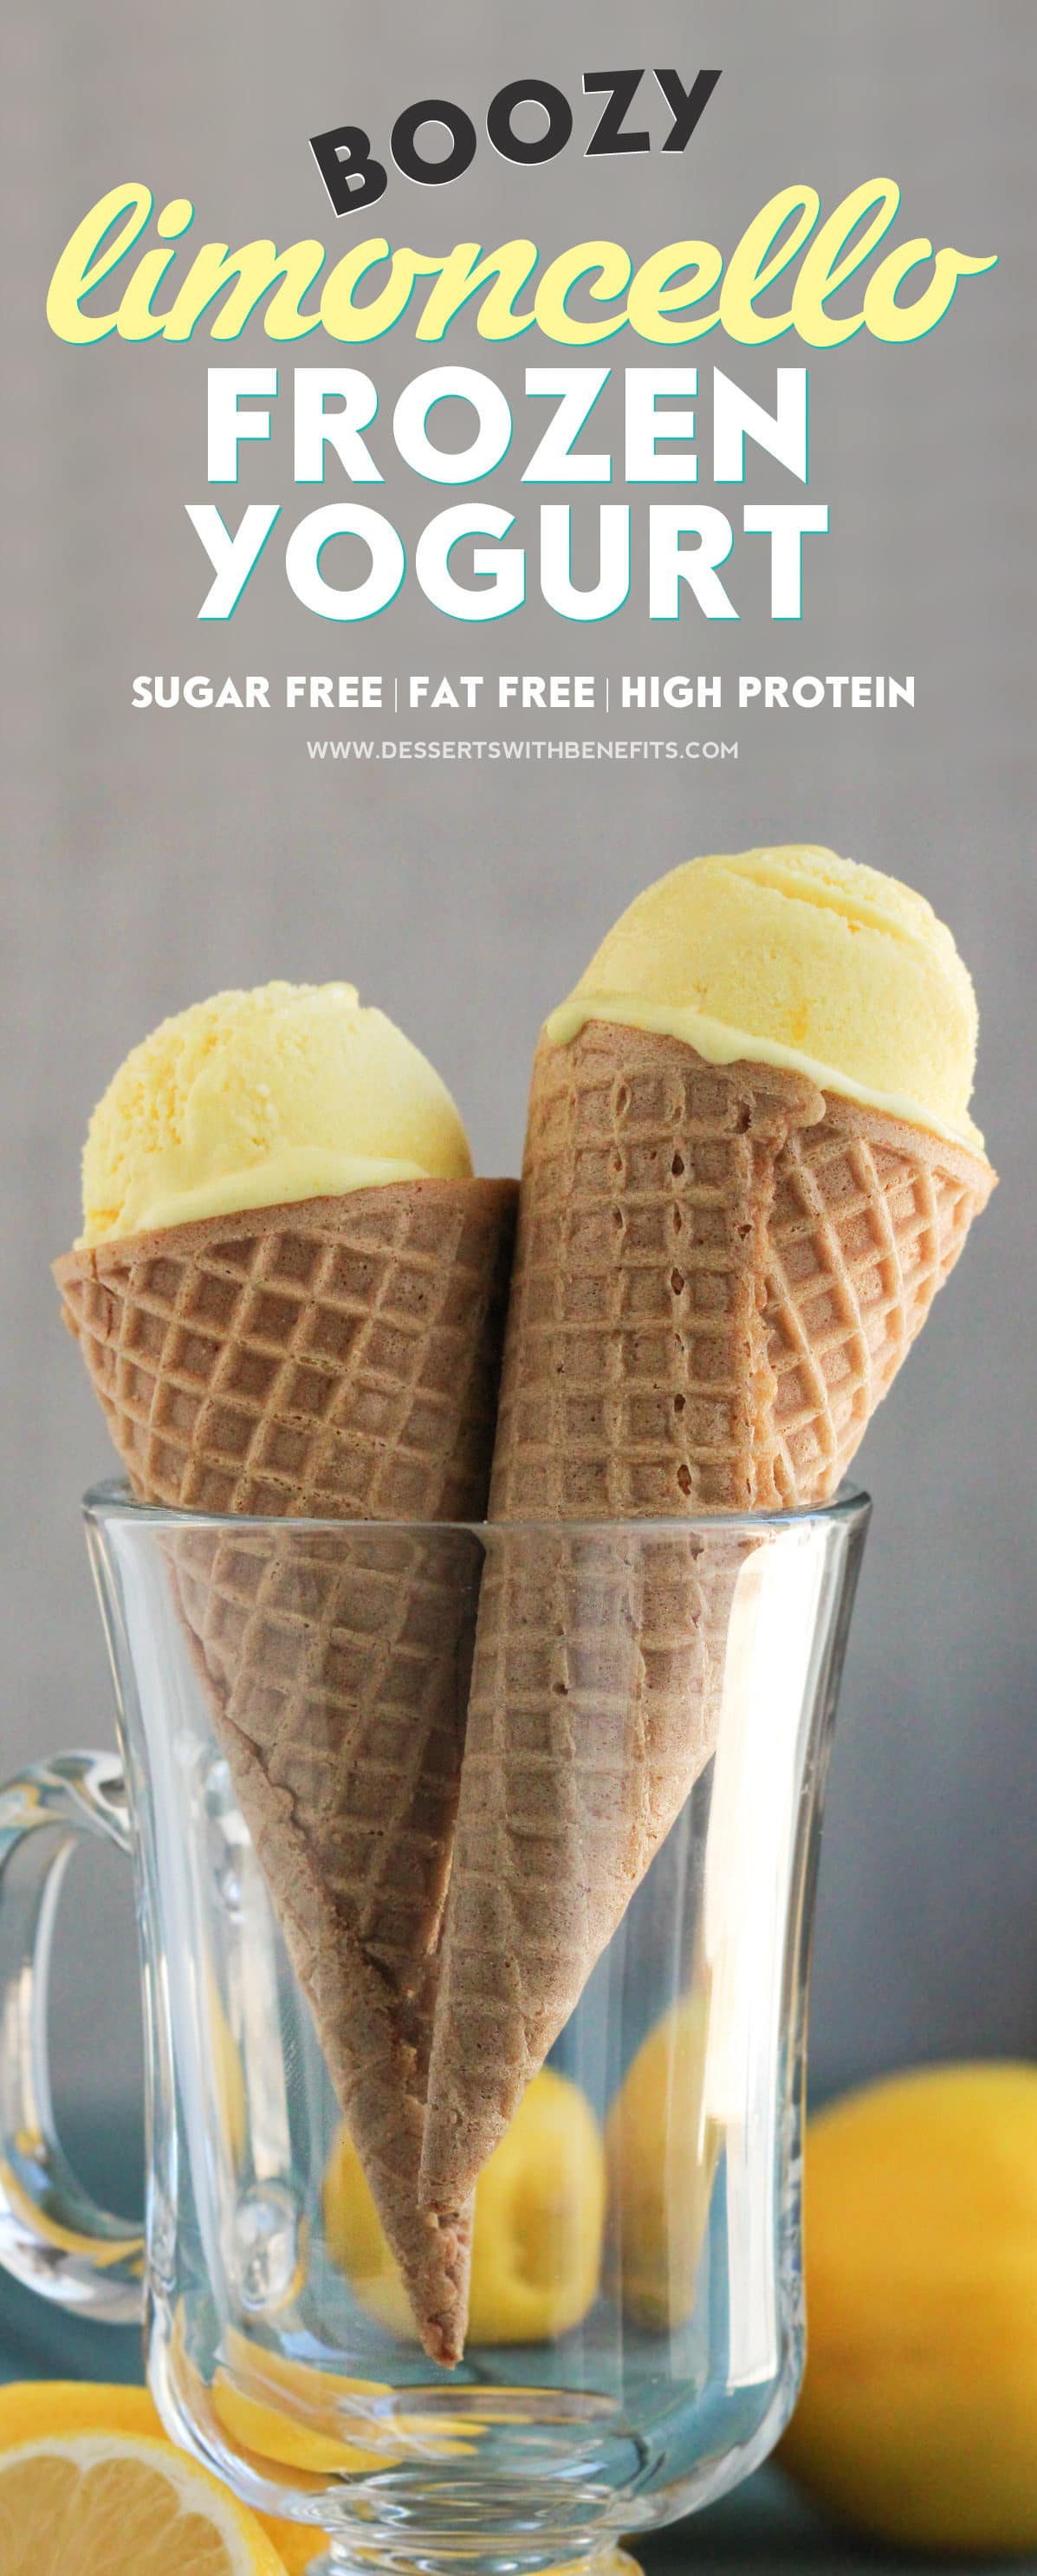 This Healthy Boozy Limoncello Frozen Yogurt recipe is creamy, tart, refreshing, and not overly sweet. It’s the perfect dessert for a delicious nightcap! You'd never know it's refined sugar free, fat free, low carb, high protein, and gluten free! Healthy Dessert Recipes at Desserts with Benefits